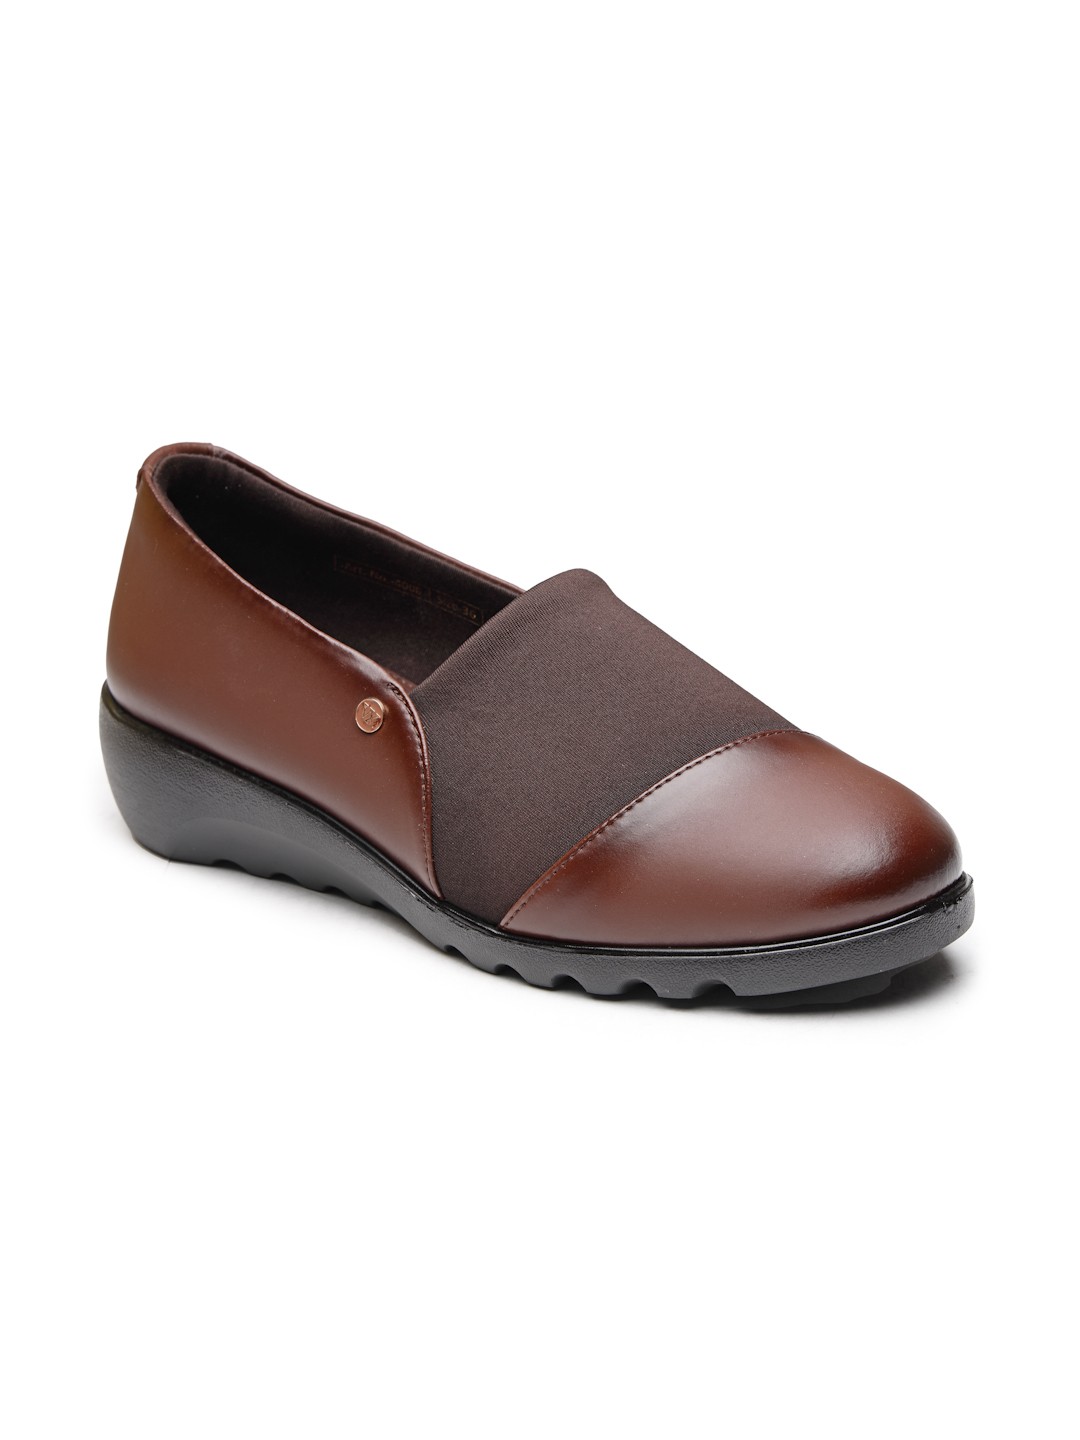 Buy Von Wellx Germany Comfort Women's Brown Casual Shoes Ayla Online in Kandy